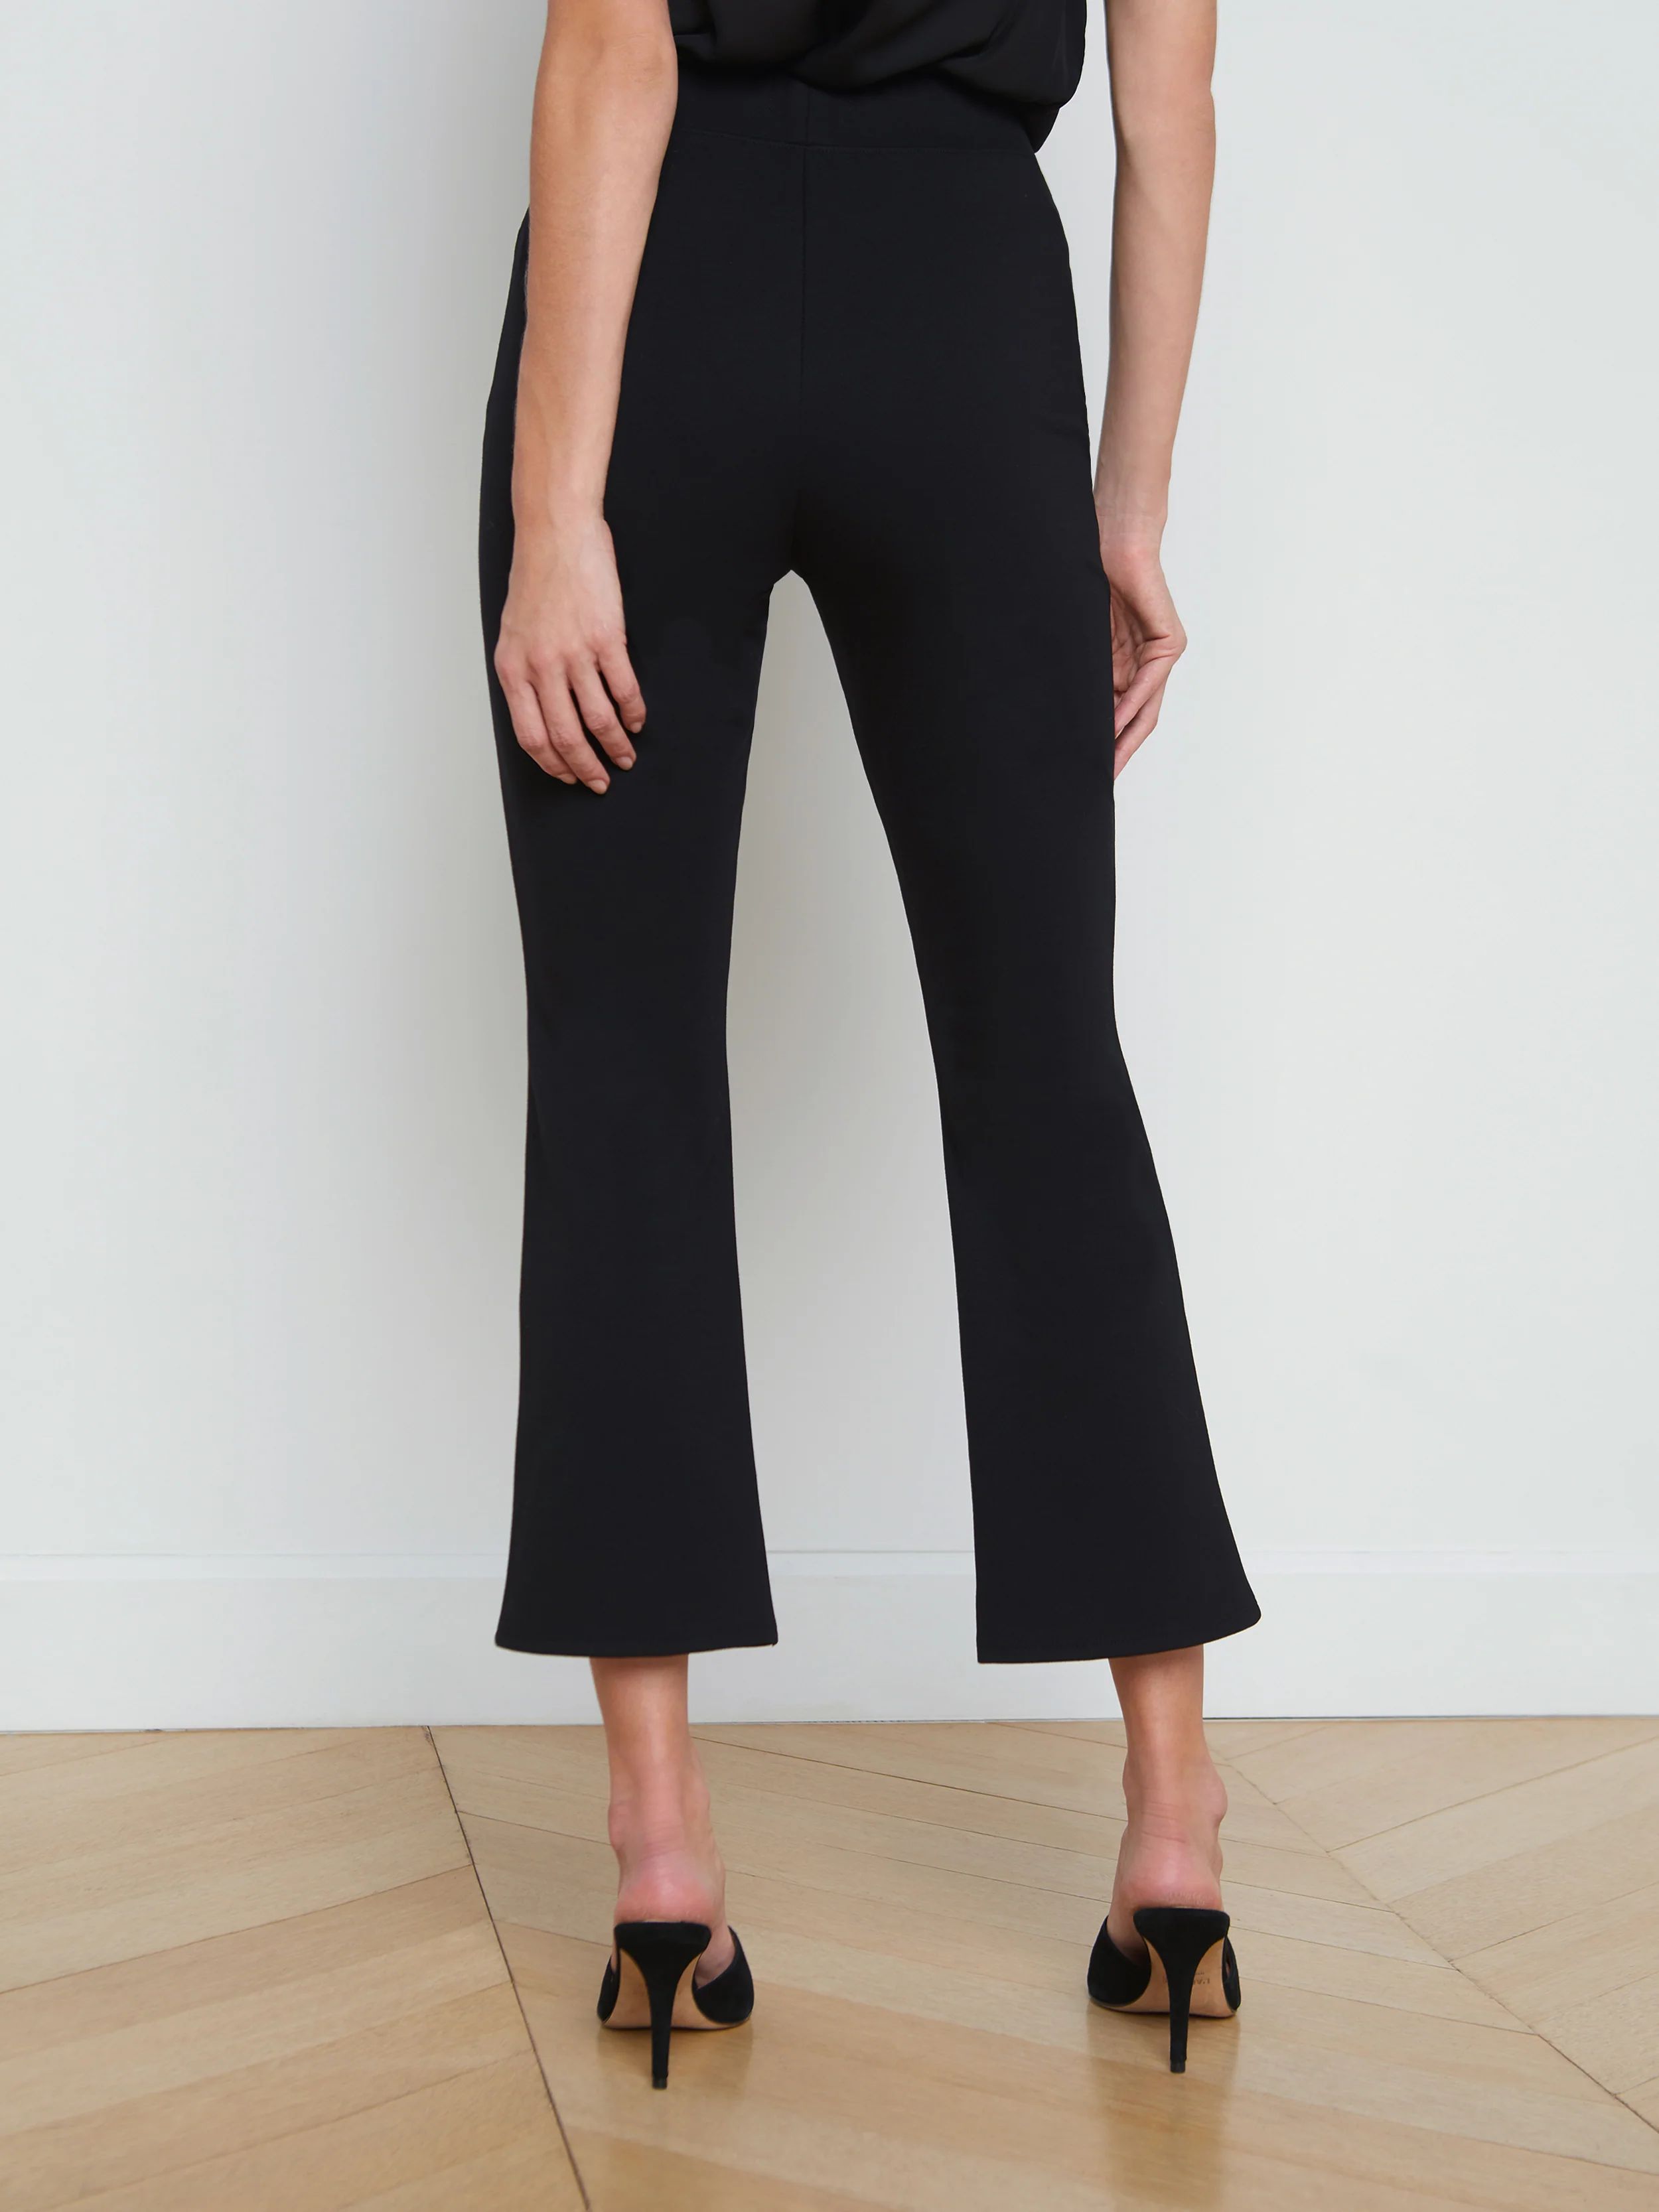 L'AGENCE - Kayden Pull-On Kick Flare Pant in Black | L'Agence